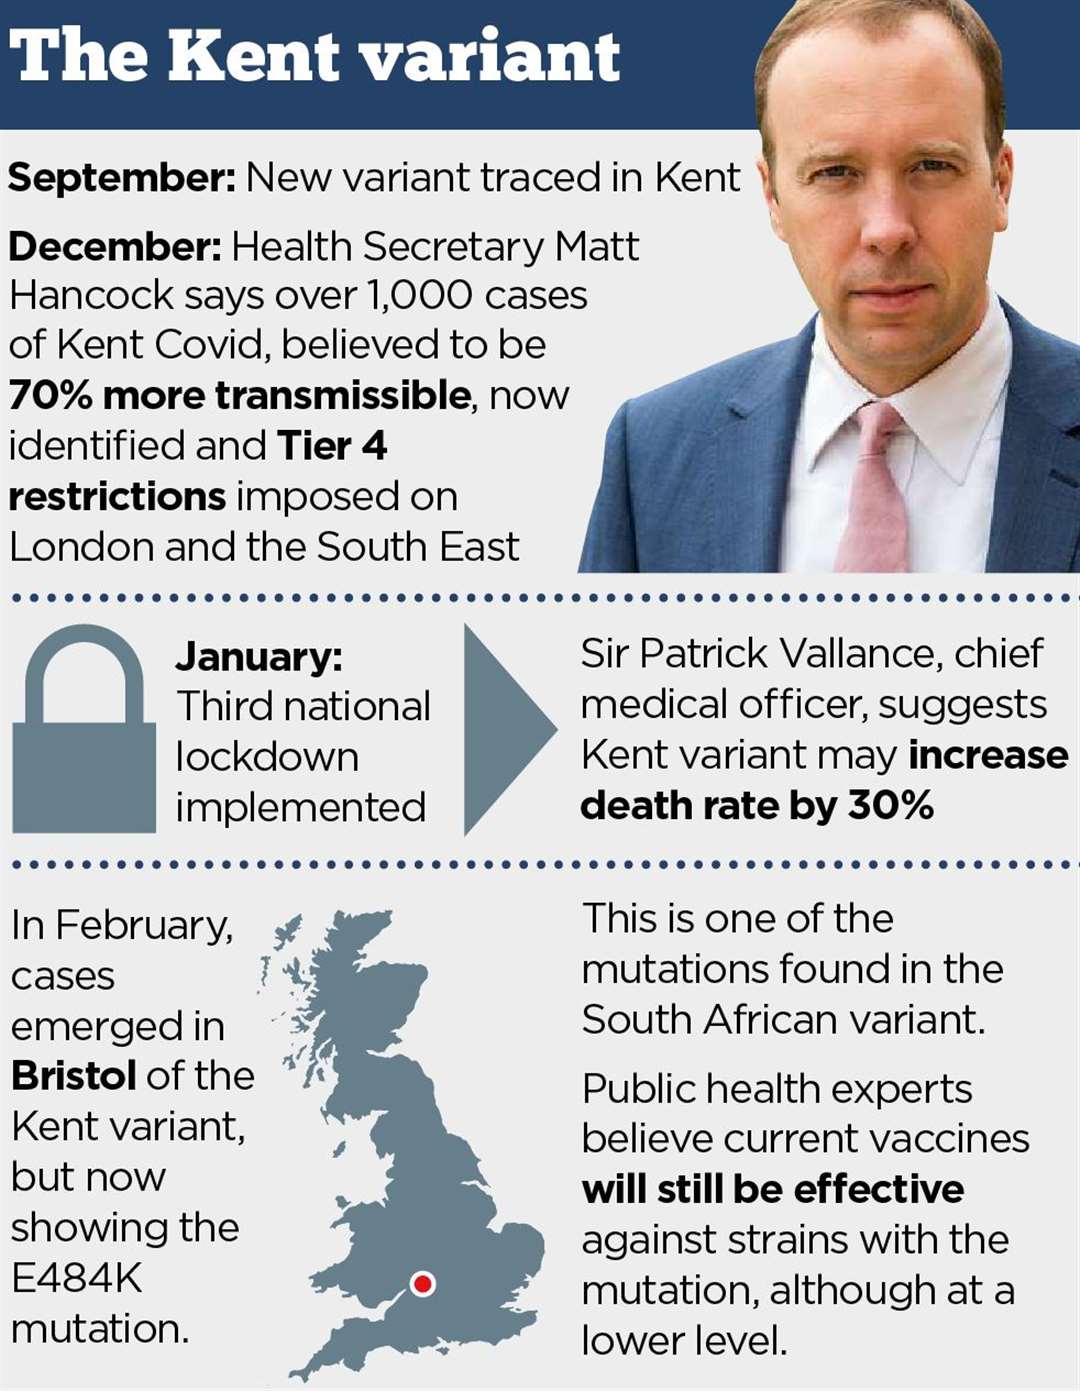 Cases of the Kent variant have emerged in the Bristol area, but are showing the E484K mutation